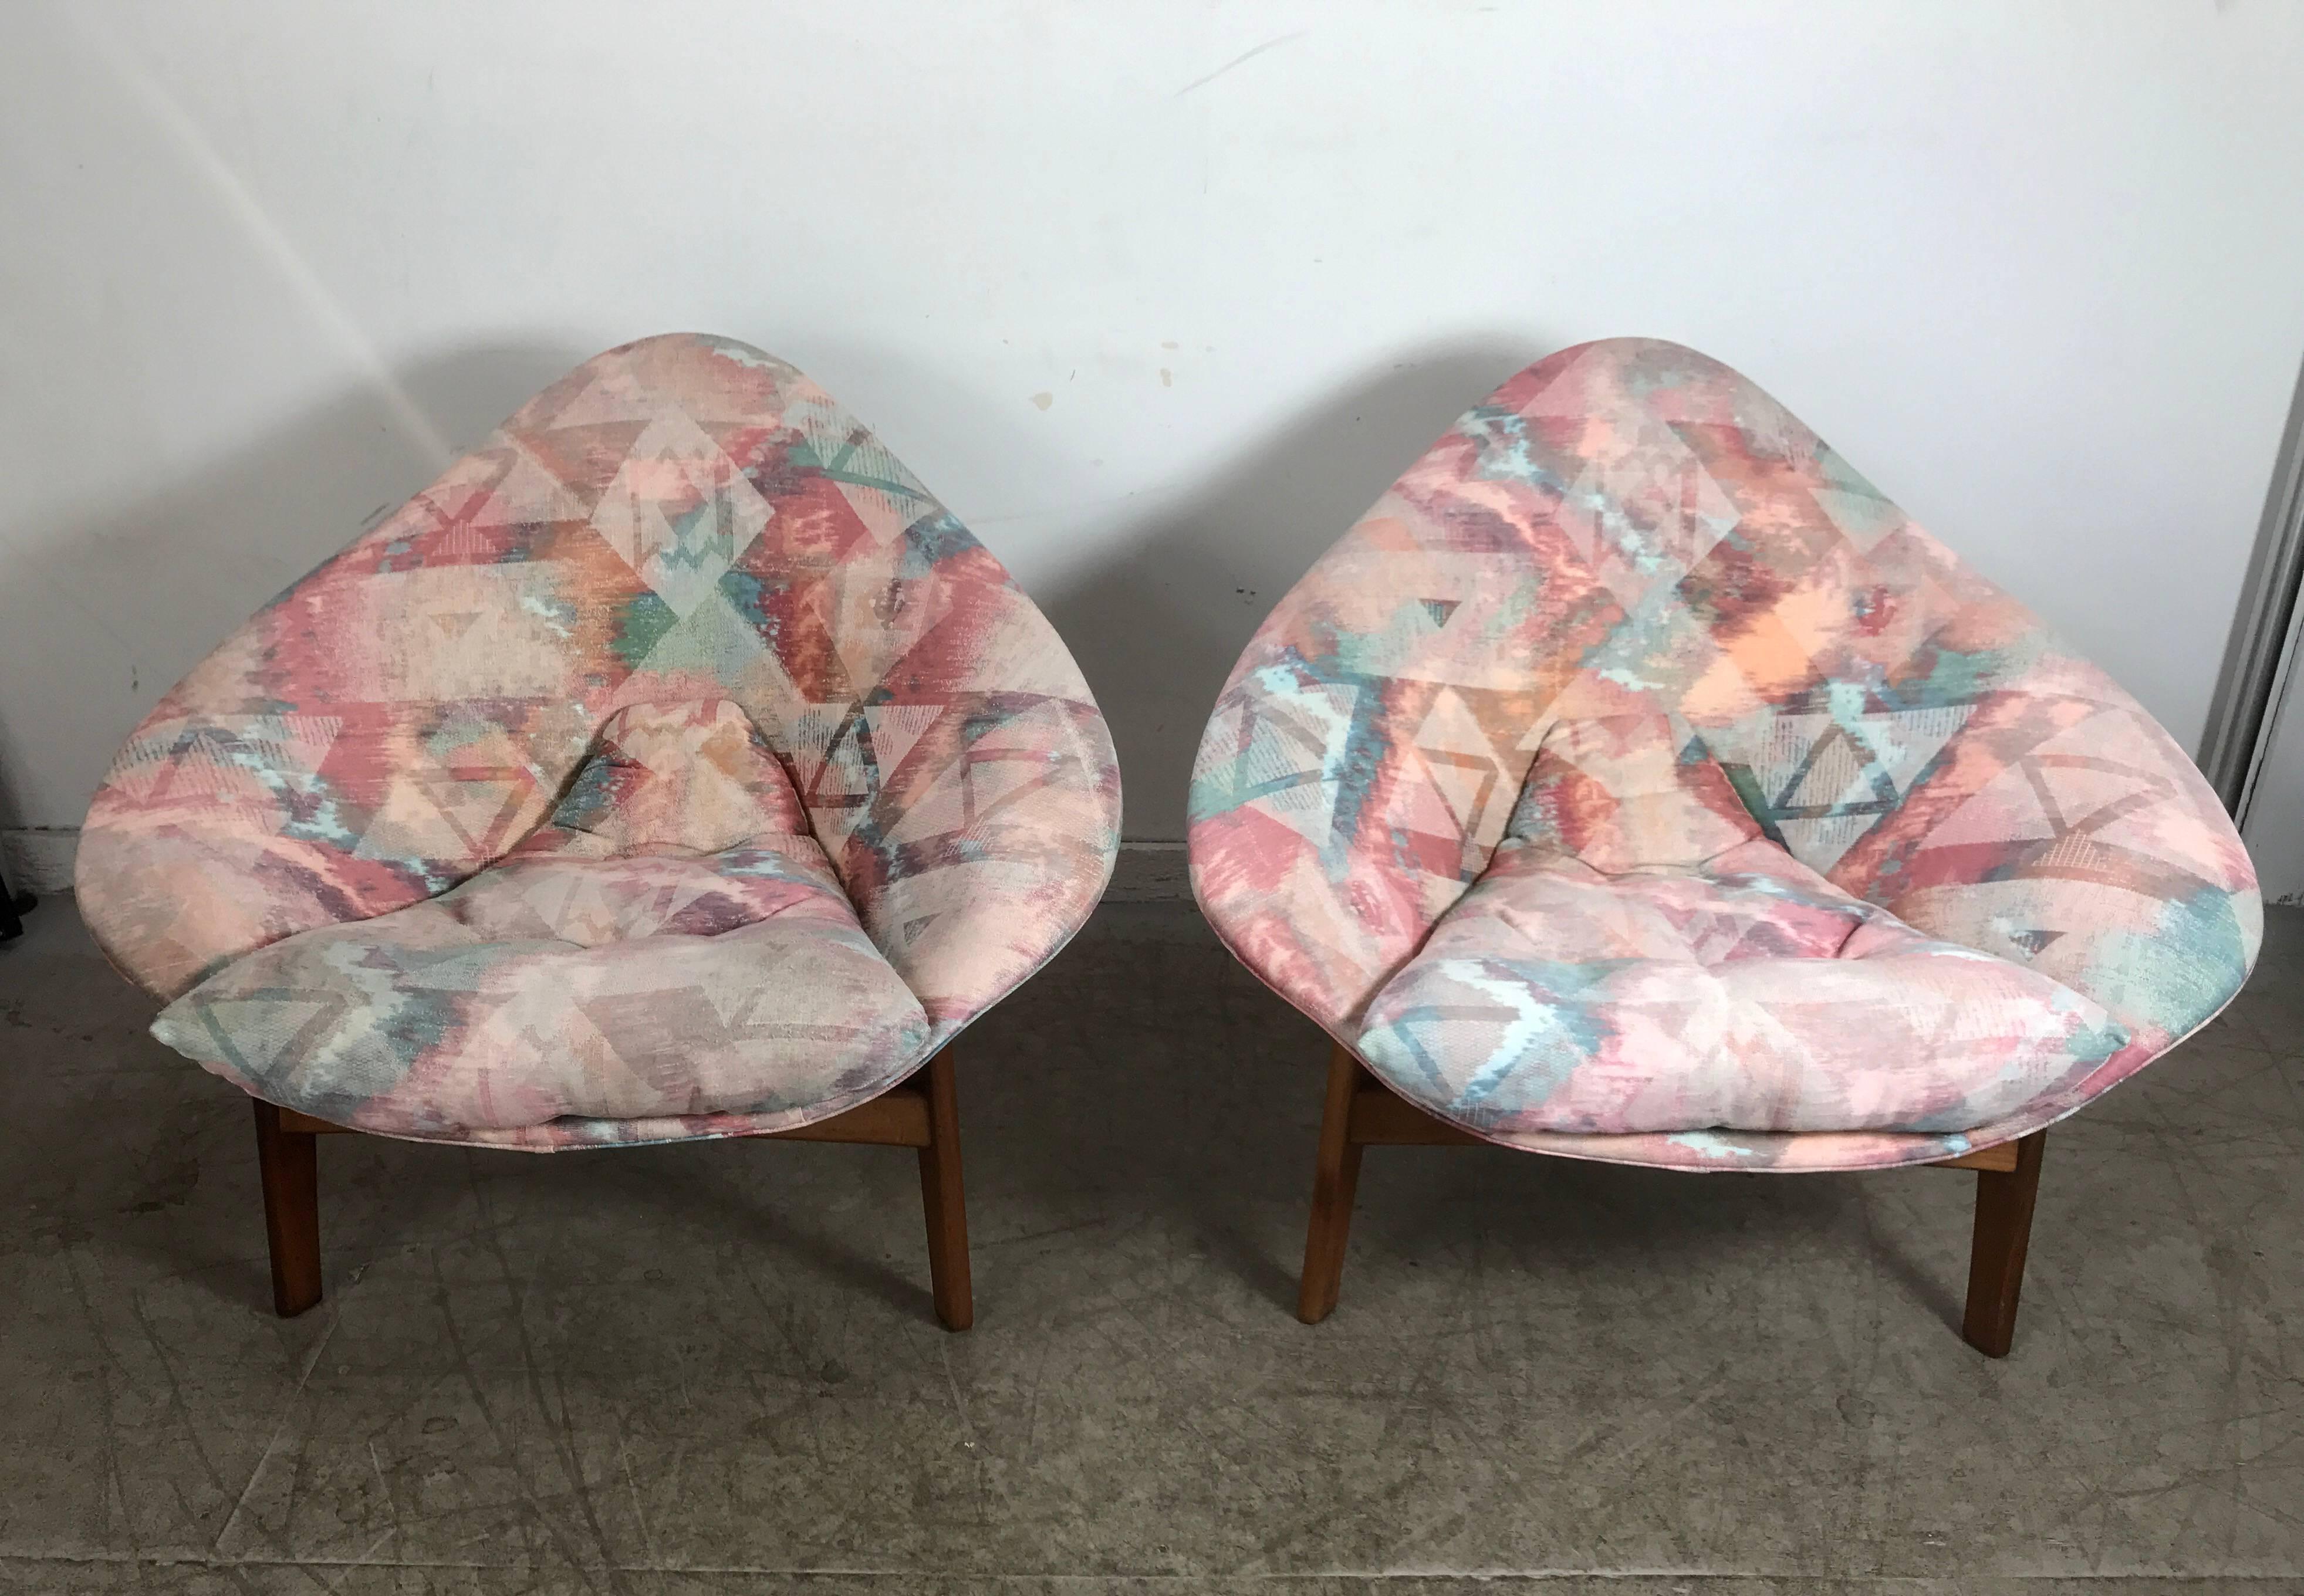 Unusual pair of Mid-Century Modern sculptural walnut lounge chairs by Adrian Pearsall .Beautiful three-leg sculpted walnut base, diamond wedge molded top, reupholstered in what appears to be the 1980s, in nice usable condition, extremely